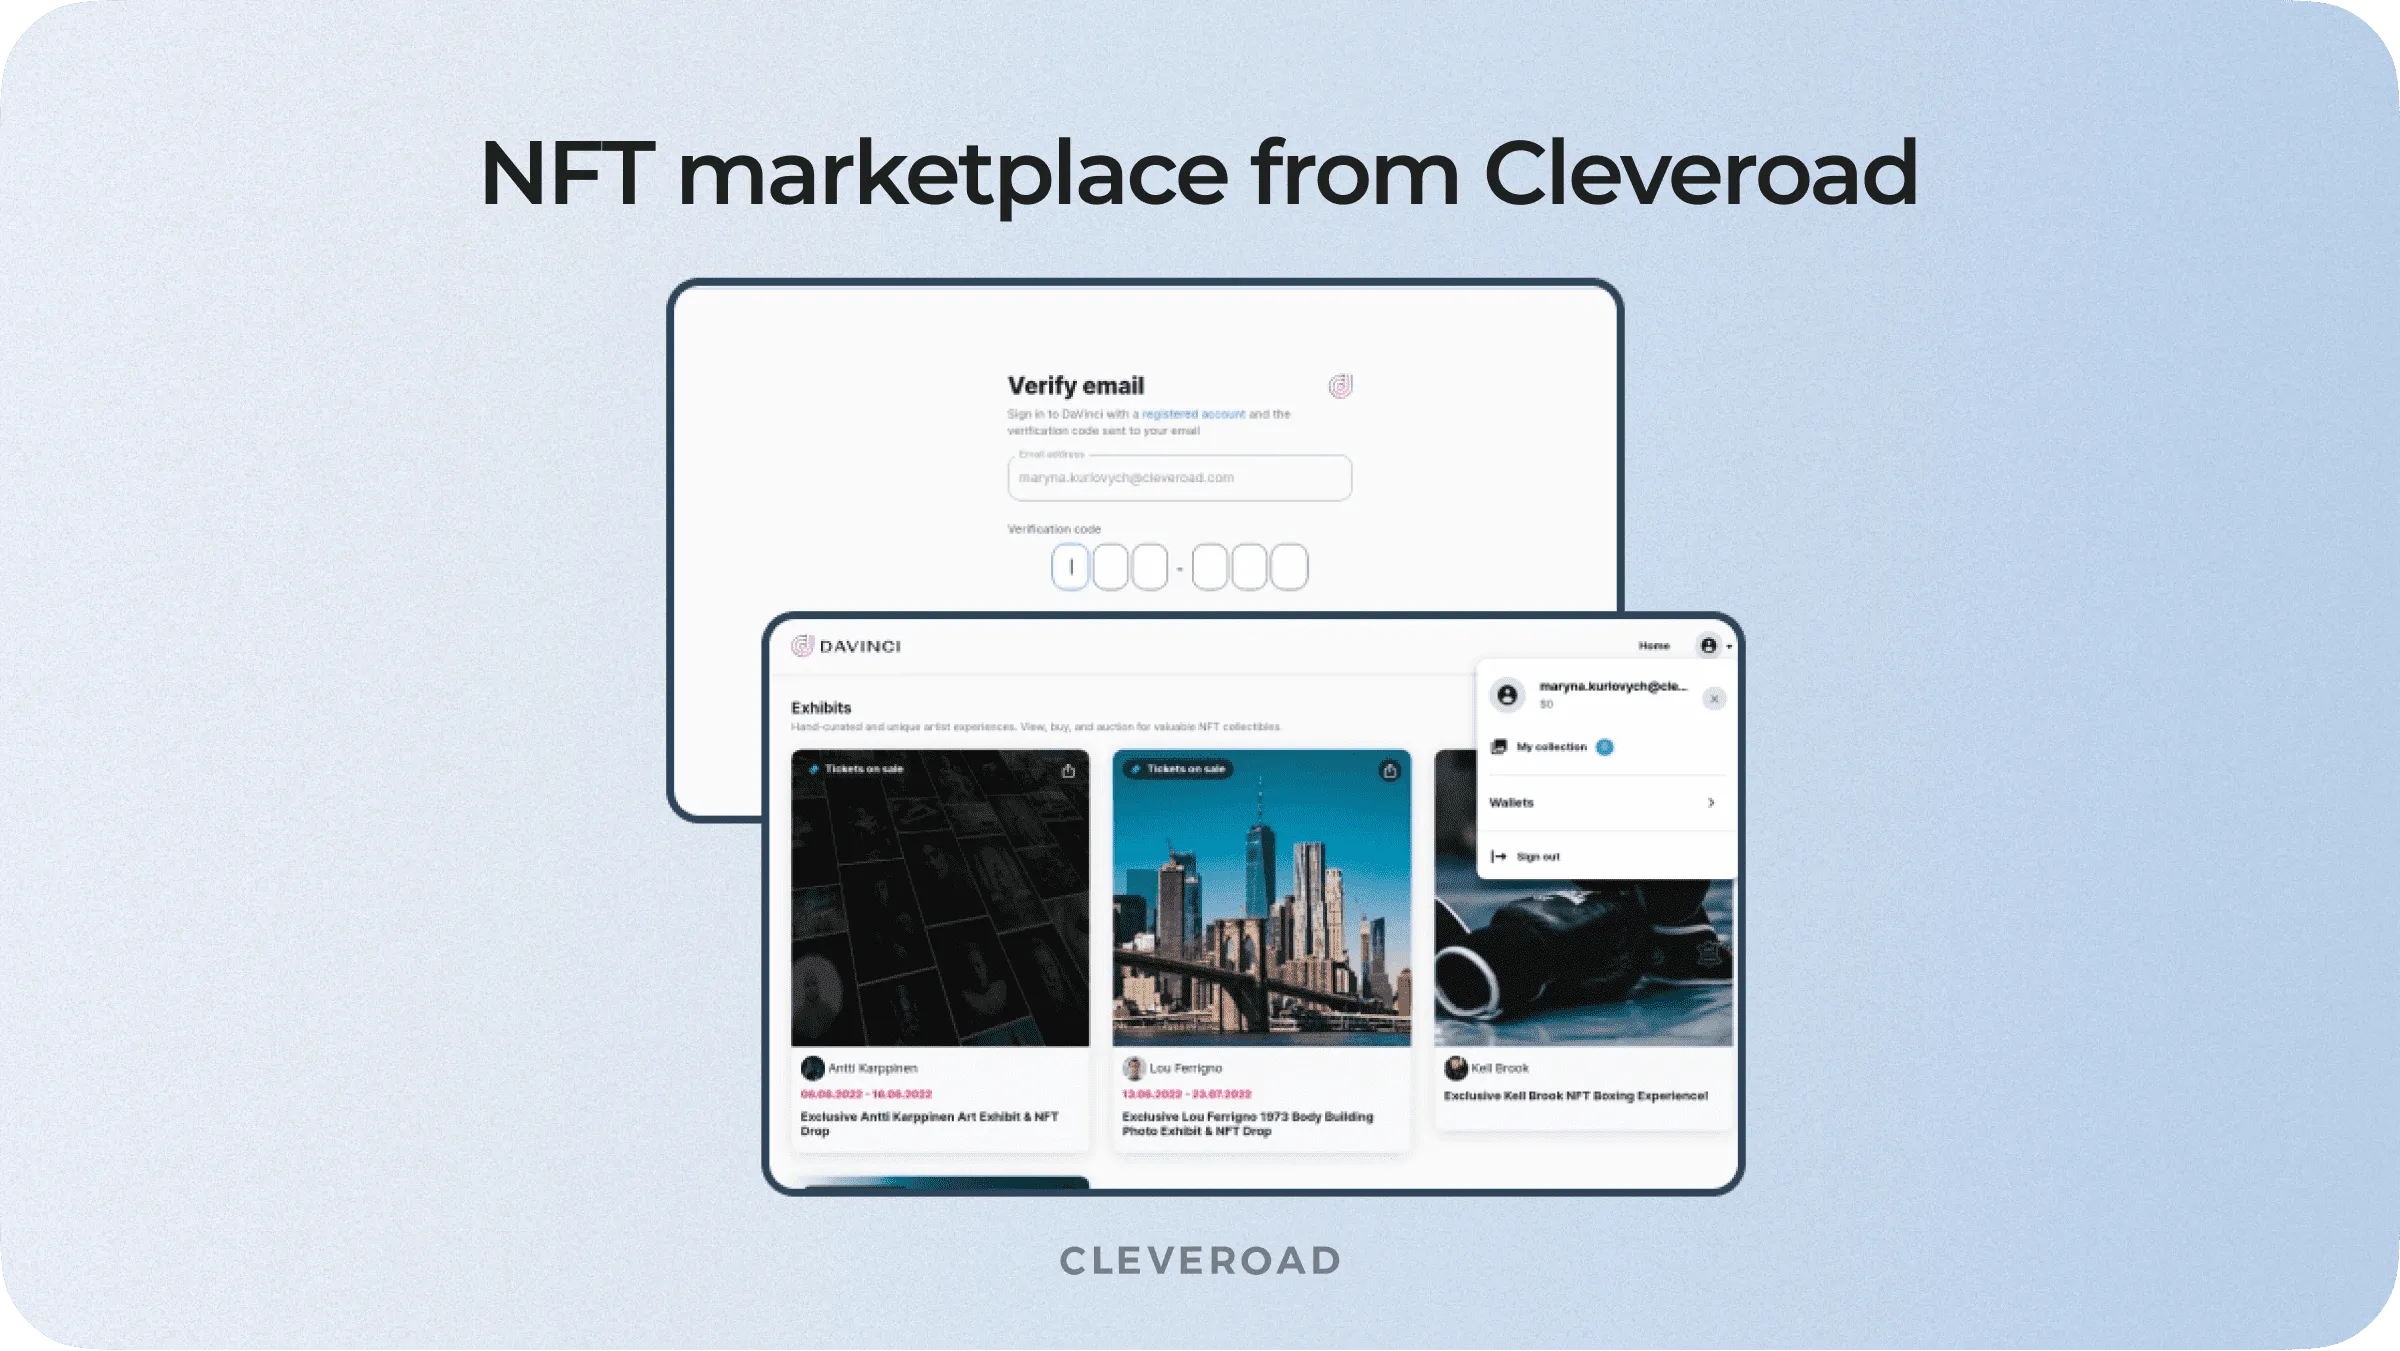 NFT marketplace from Cleveroad